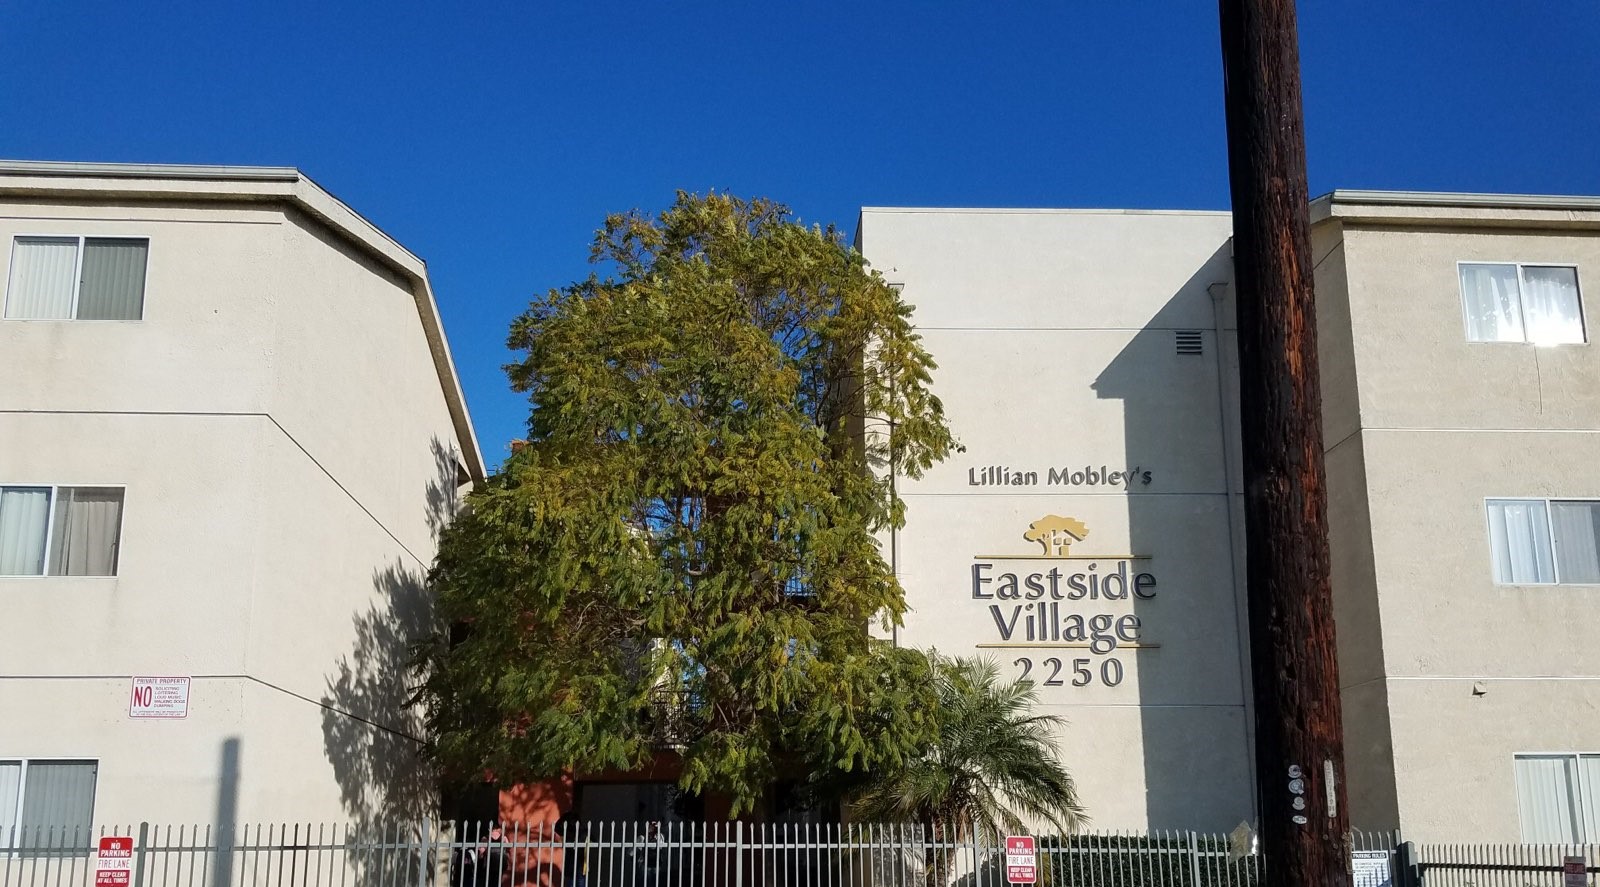 Street view of Eastside Village, multistory building surrounded by a gate with a larg tree inside the gate and power pole in front of building